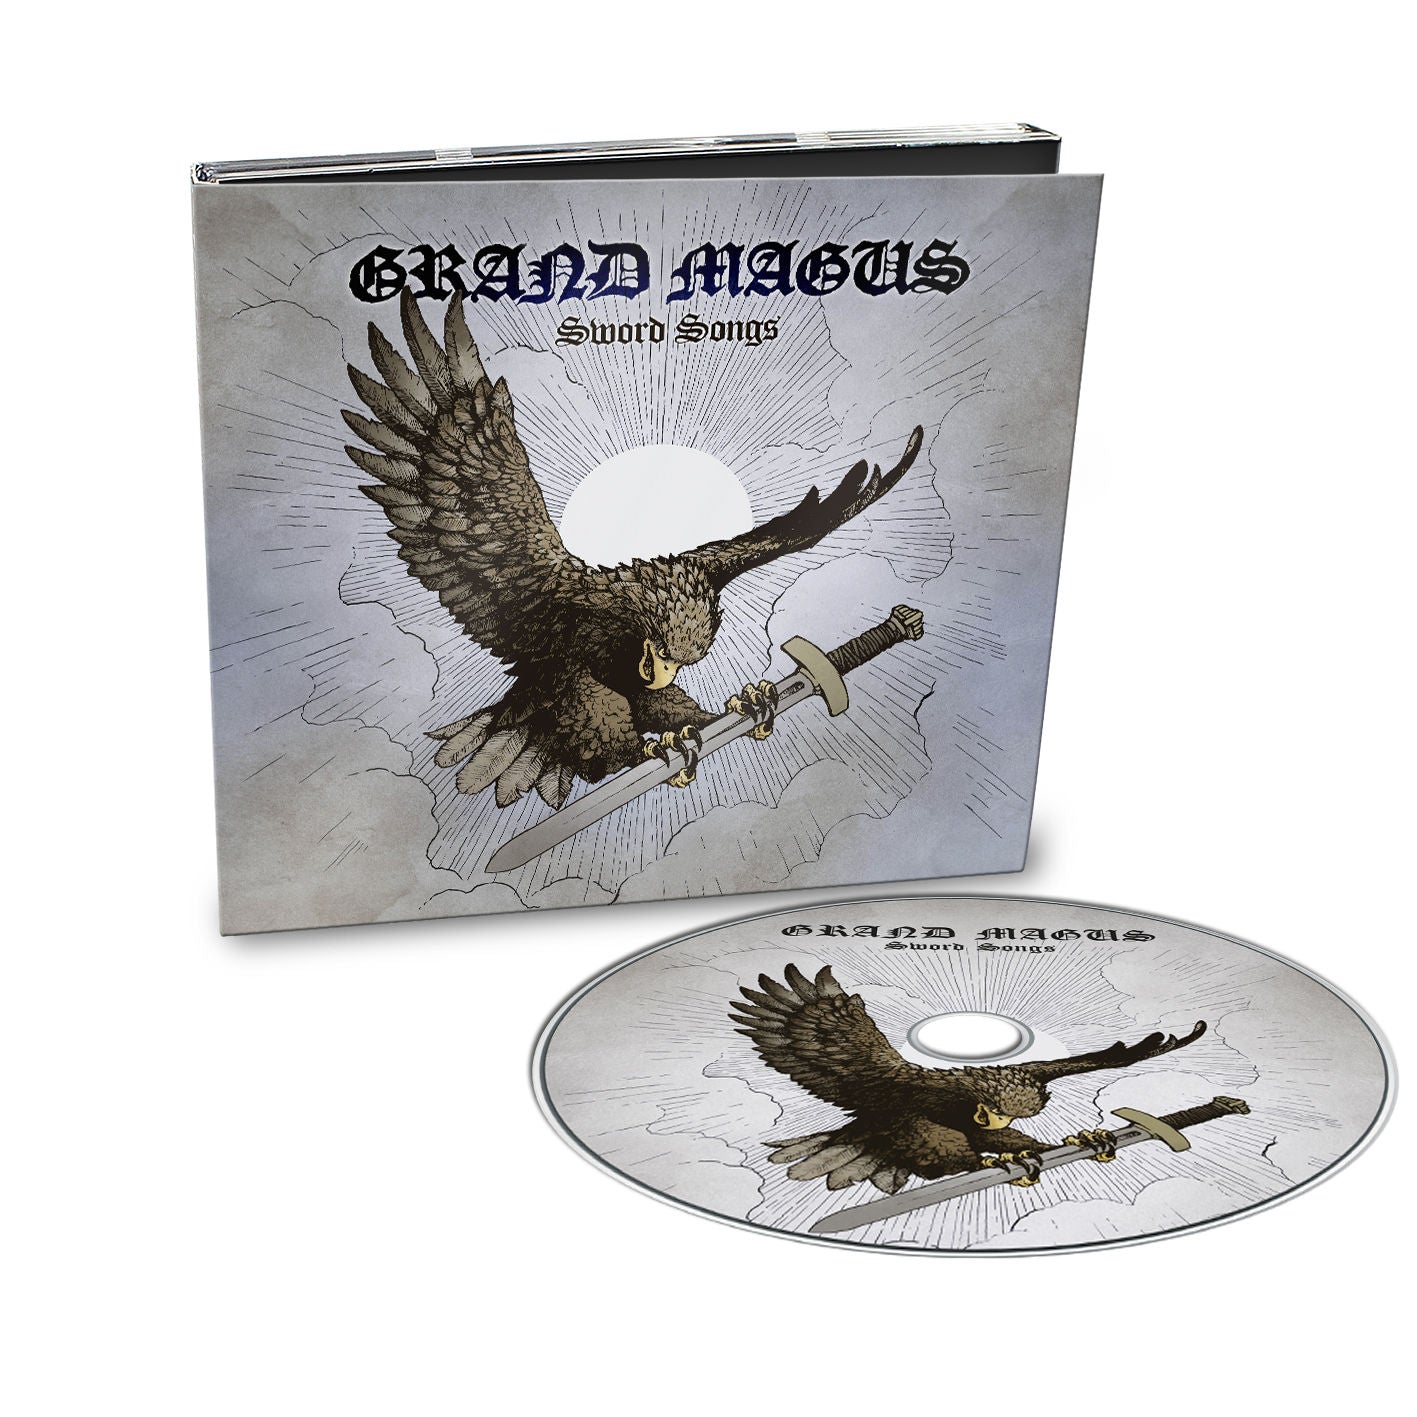 Grand Magus - Sword Songs: Limited Edition CD